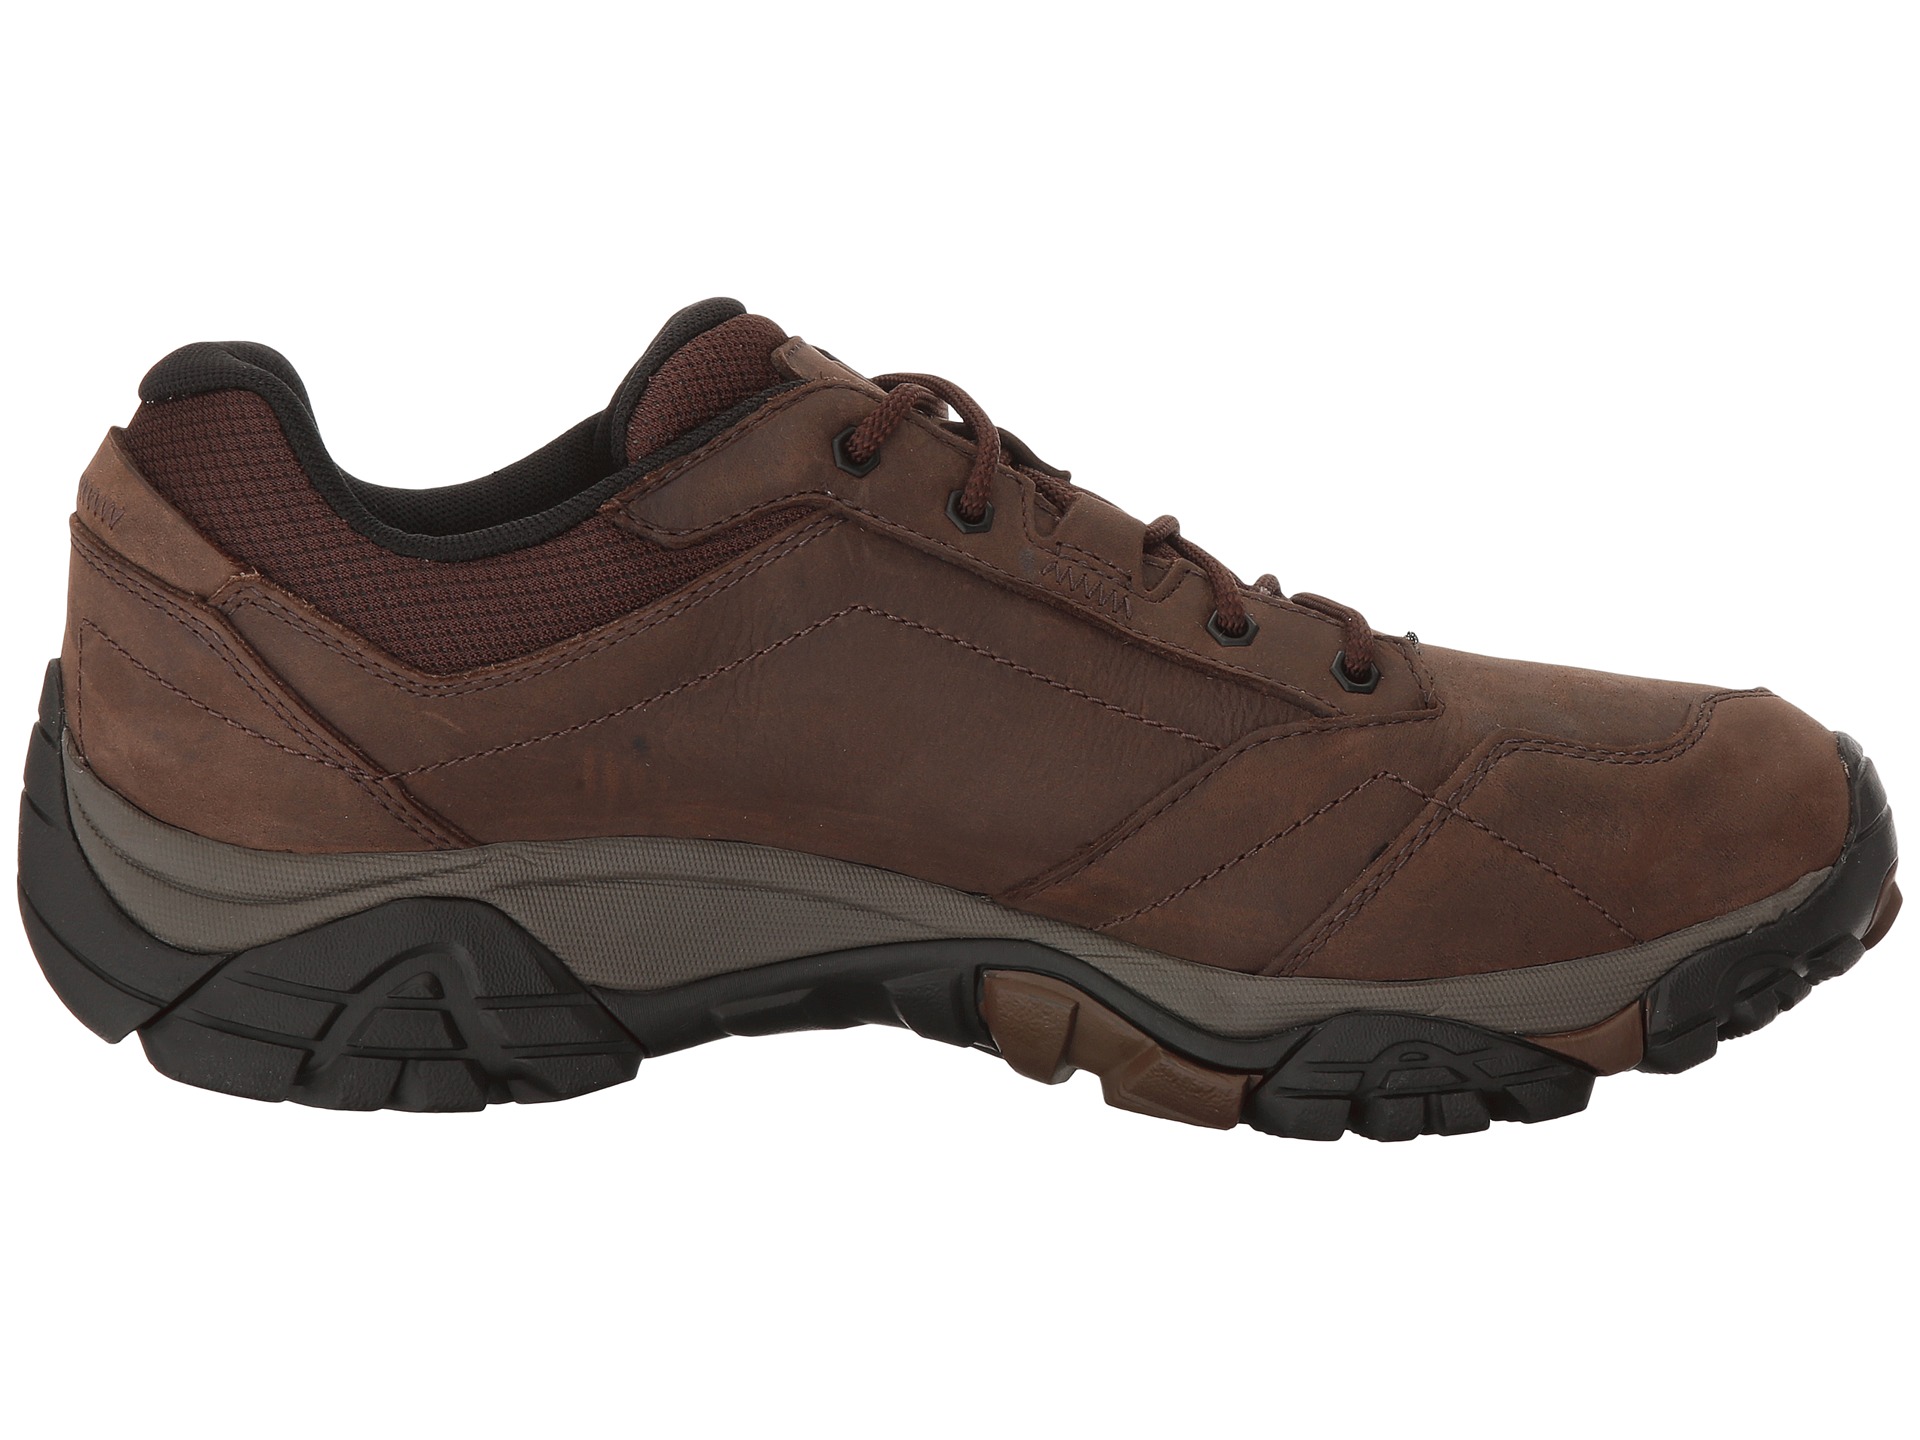 Merrell Moab Adventure Lace Waterproof at Zappos.com